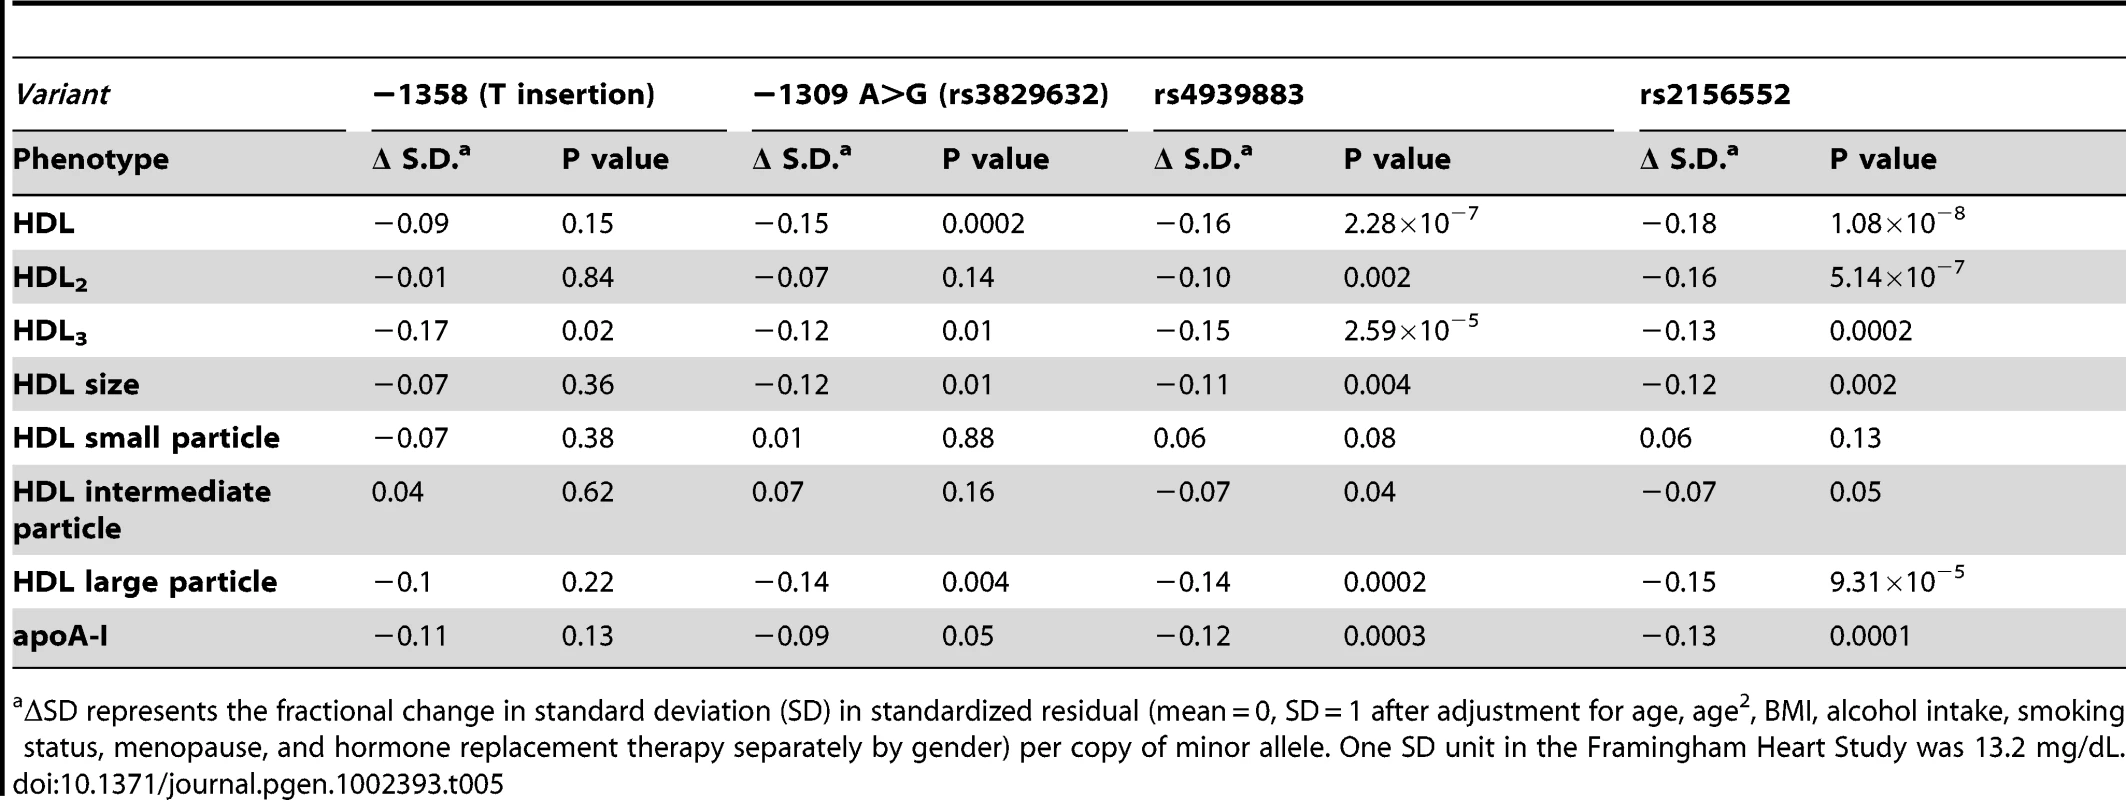 Association of common variants with HDL in Framingham Heart Study.